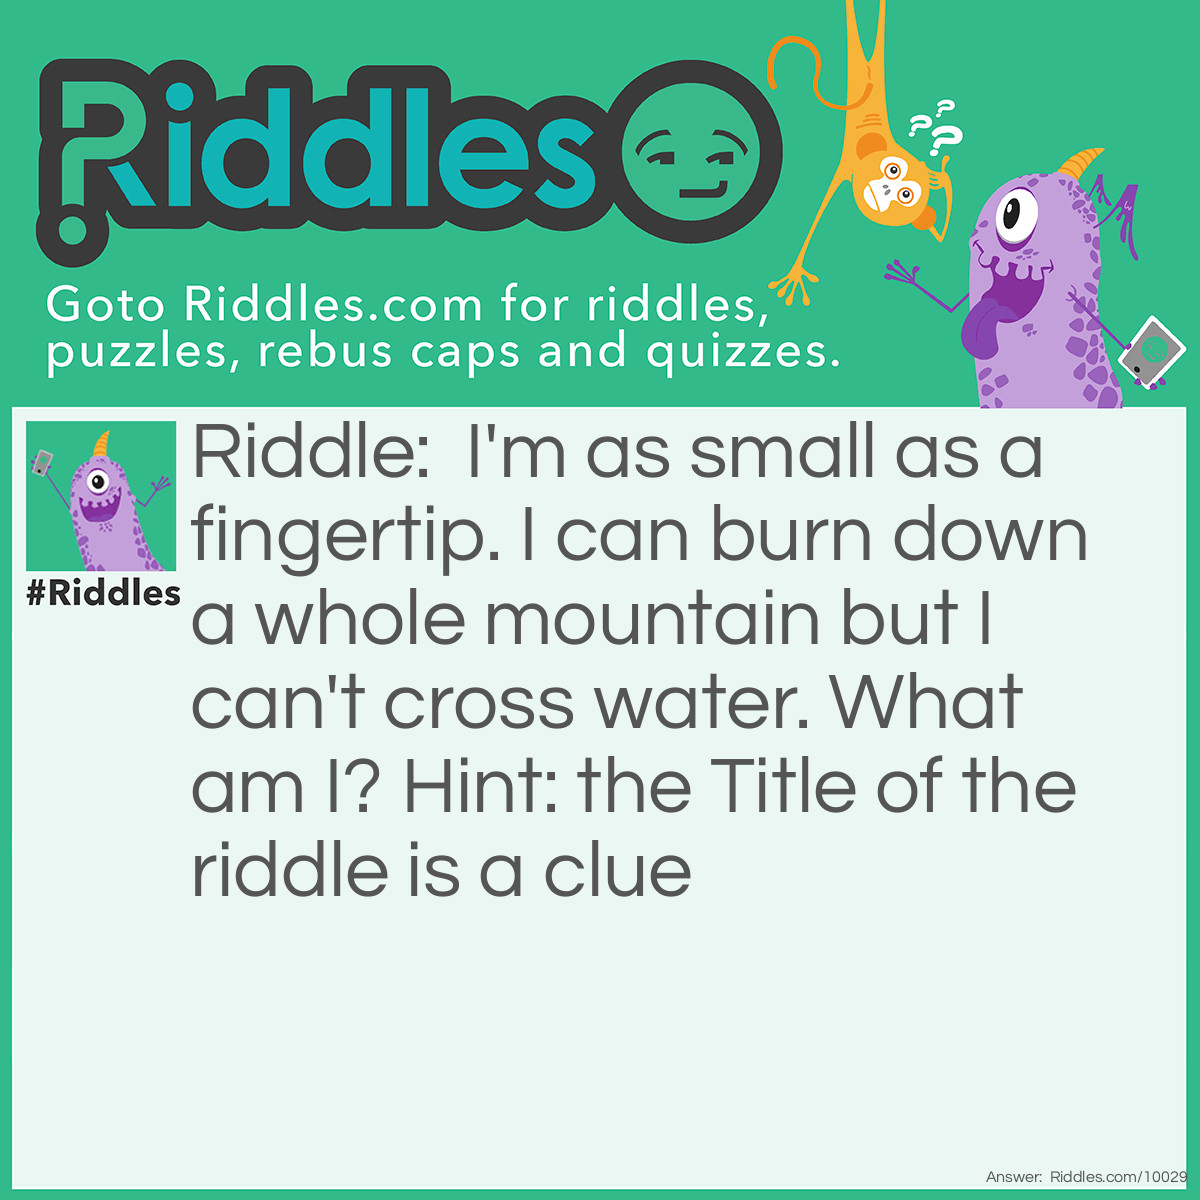 Riddle: I'm as small as a fingertip. I can burn down a whole mountain but I can't cross water. What am I? Hint: the Title of the riddle is a clue Answer: Fire.